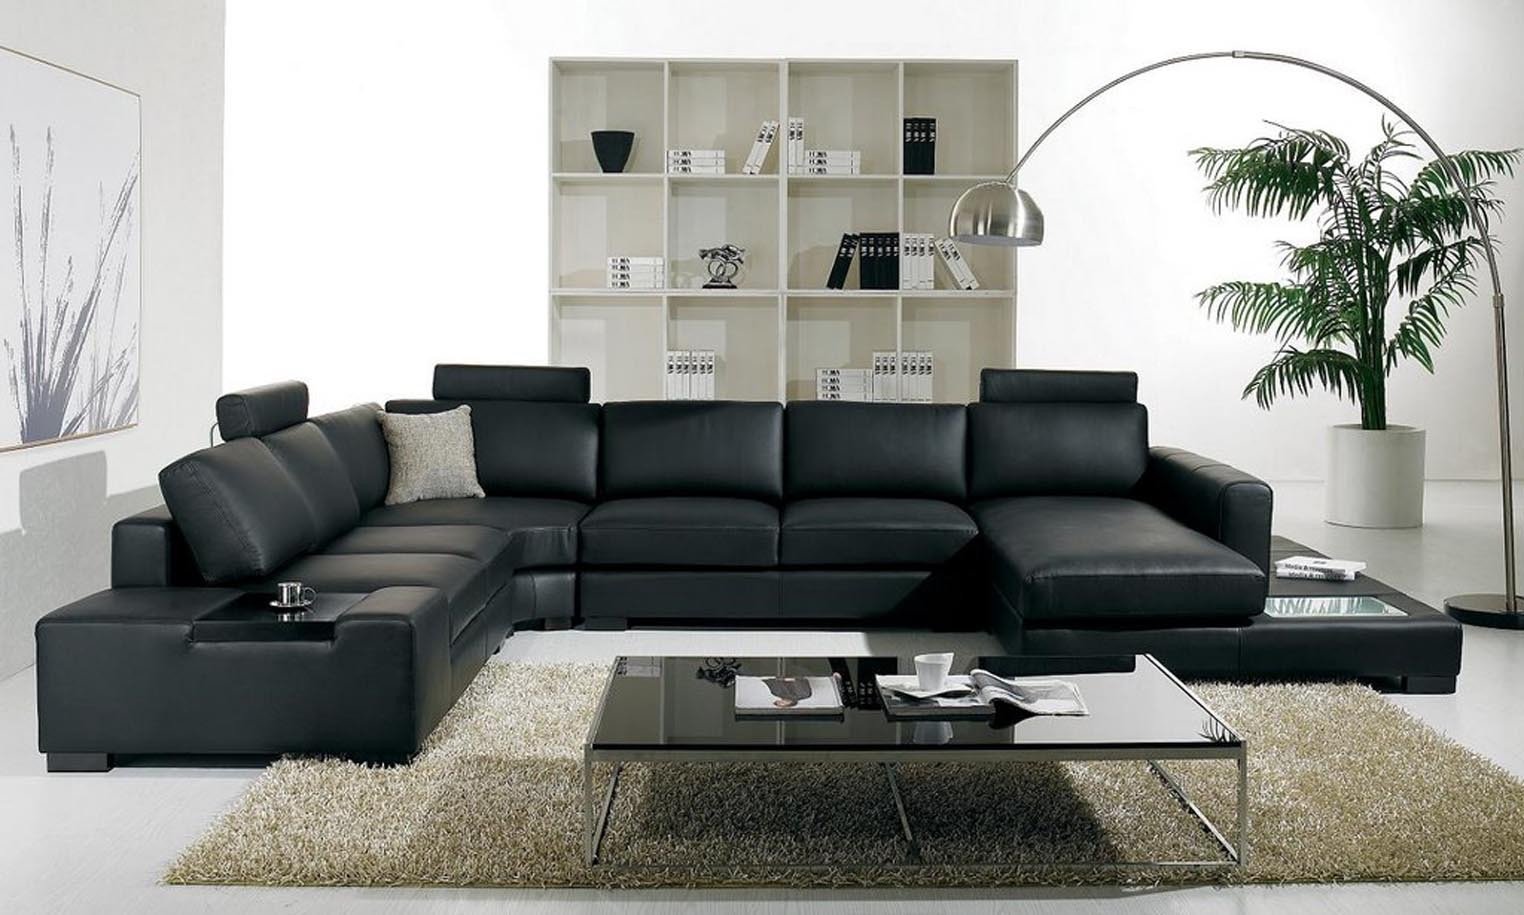 Living Room Decor with Sectional Awesome Simple Interior Design Tips to Make Over Your Living Room